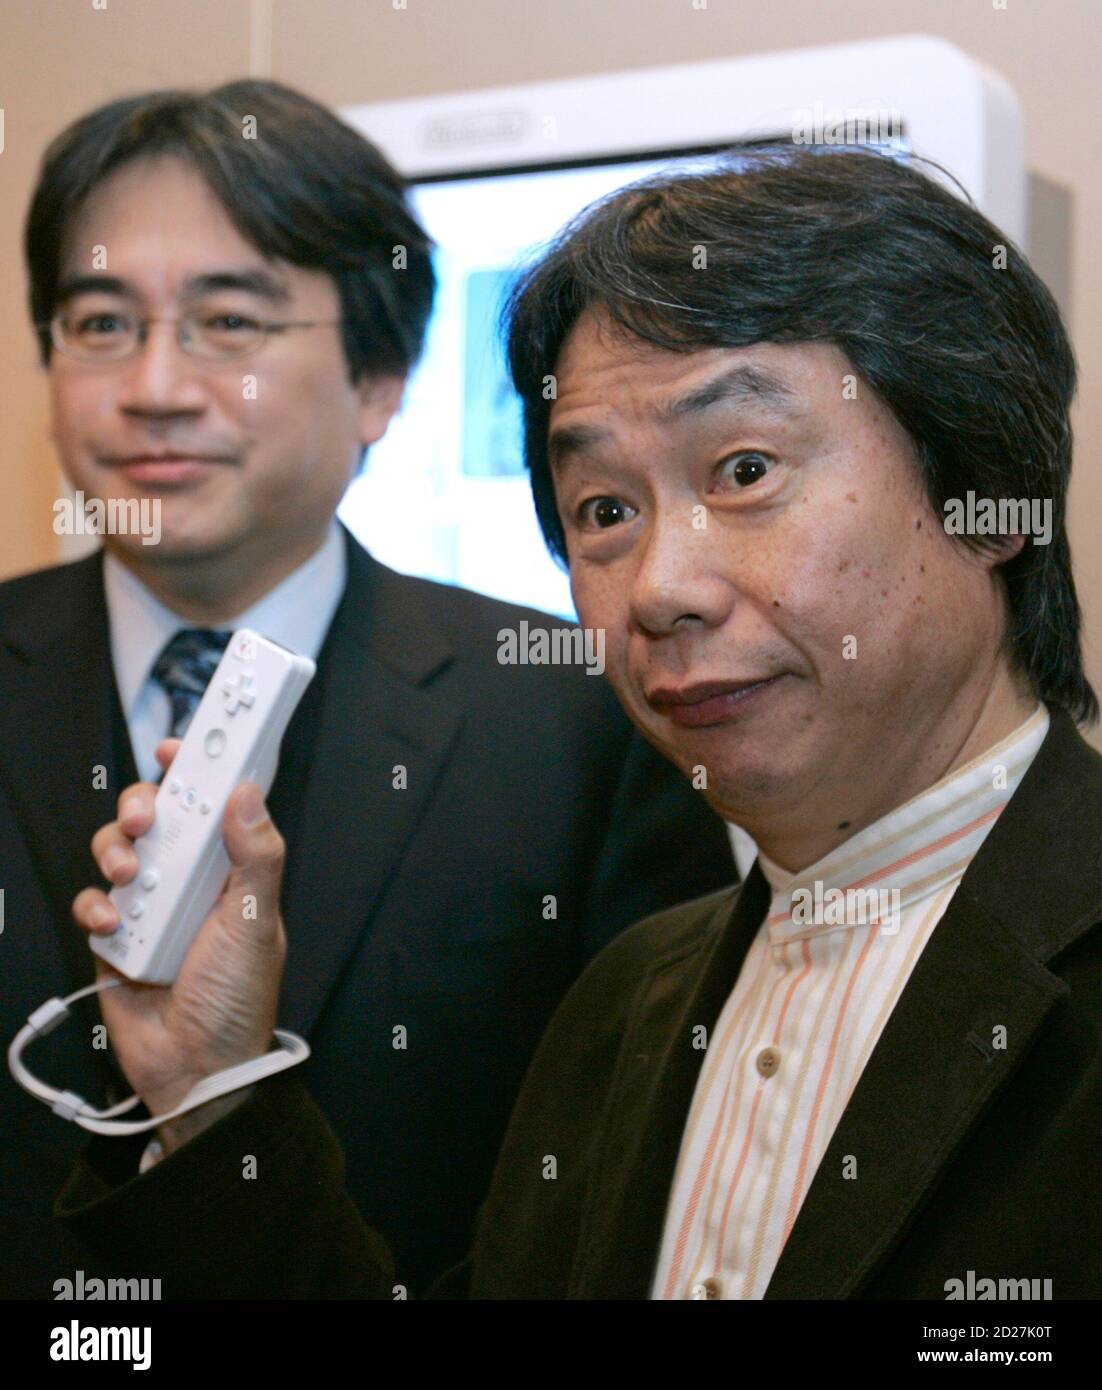 Japanese video game maker Nintendo Co's senior managing director and  "Mario" creator Shigeru Miyamoto (R) holds the new Wii game console  controller next to president Satoru Iwata during a news conference in